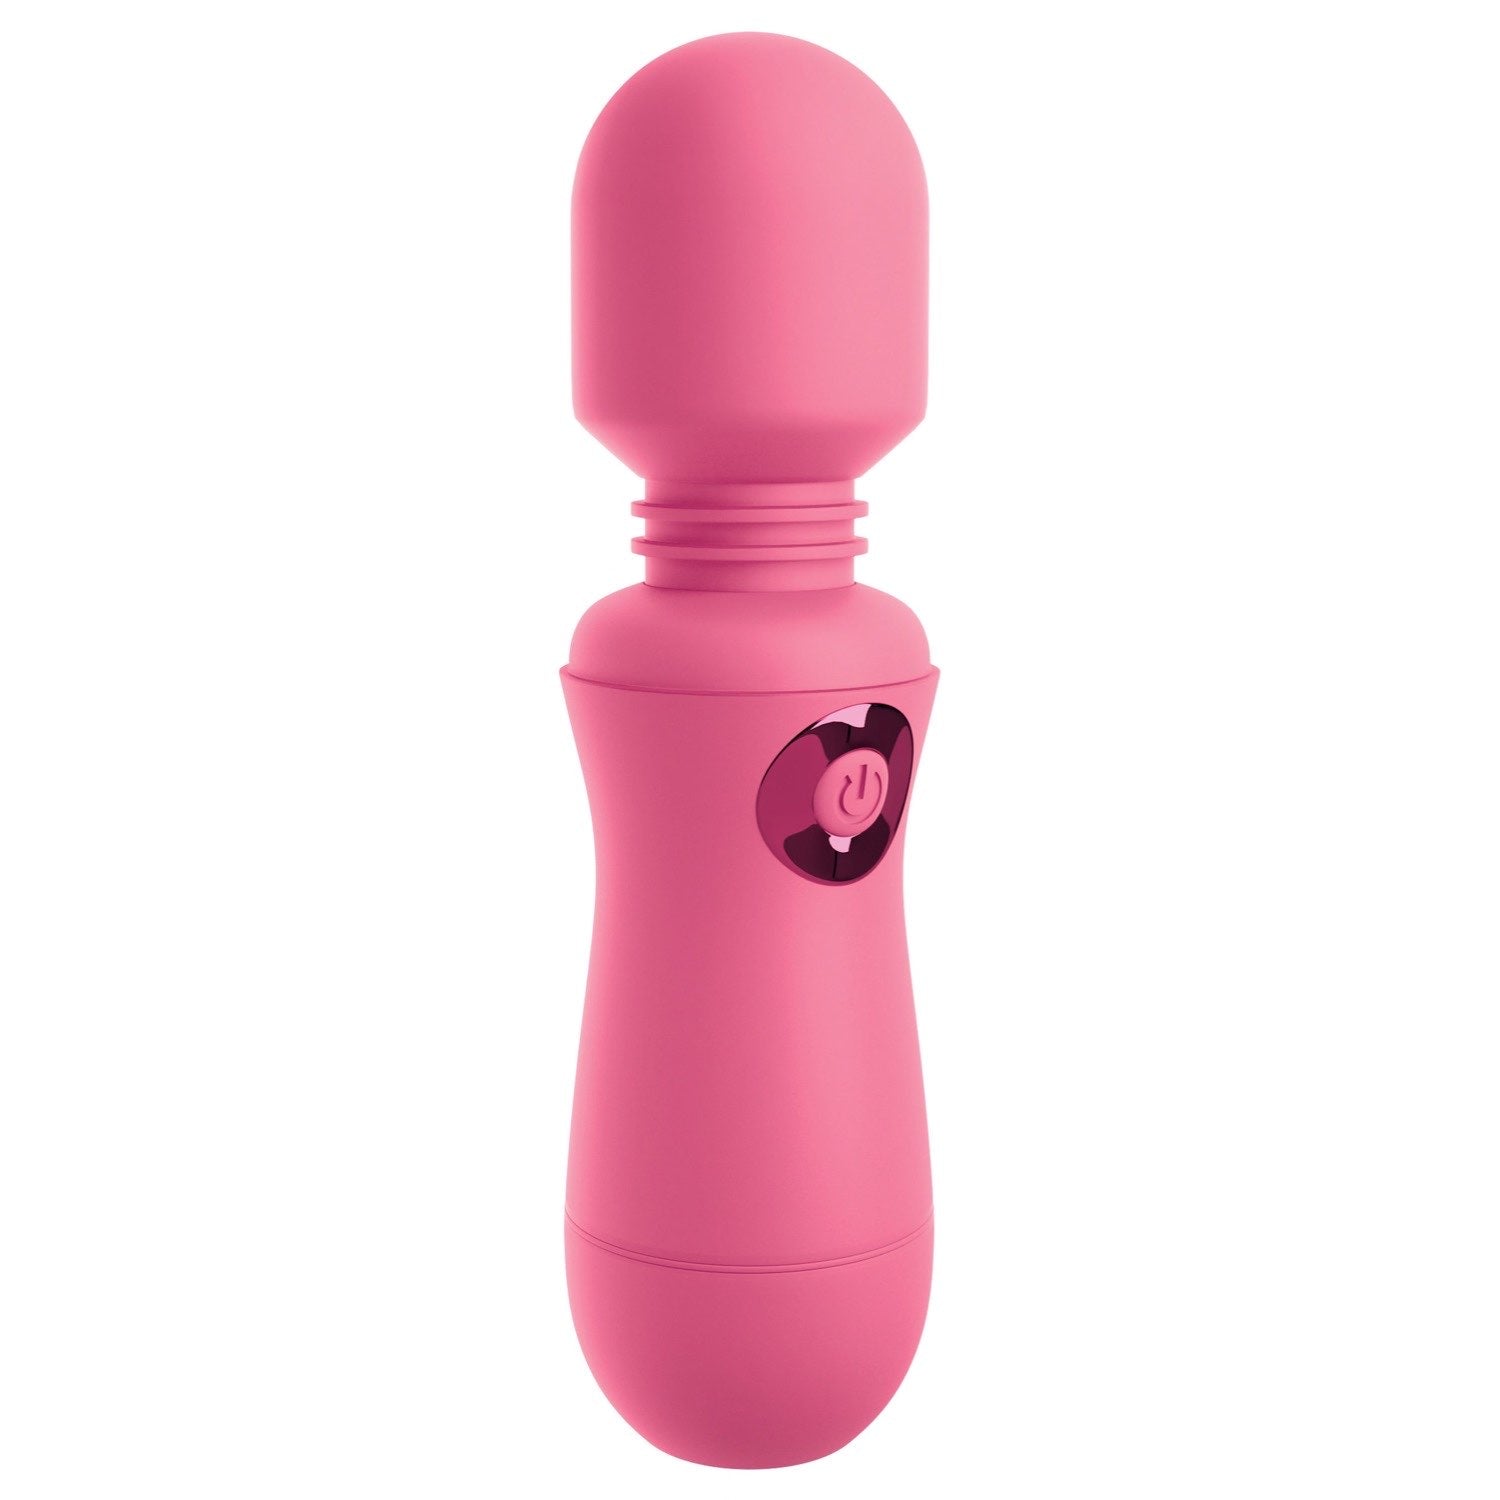 Omg! OMG! Wands #Enjoy - Pink USB Rechargeable Massager Wand by Pipedream